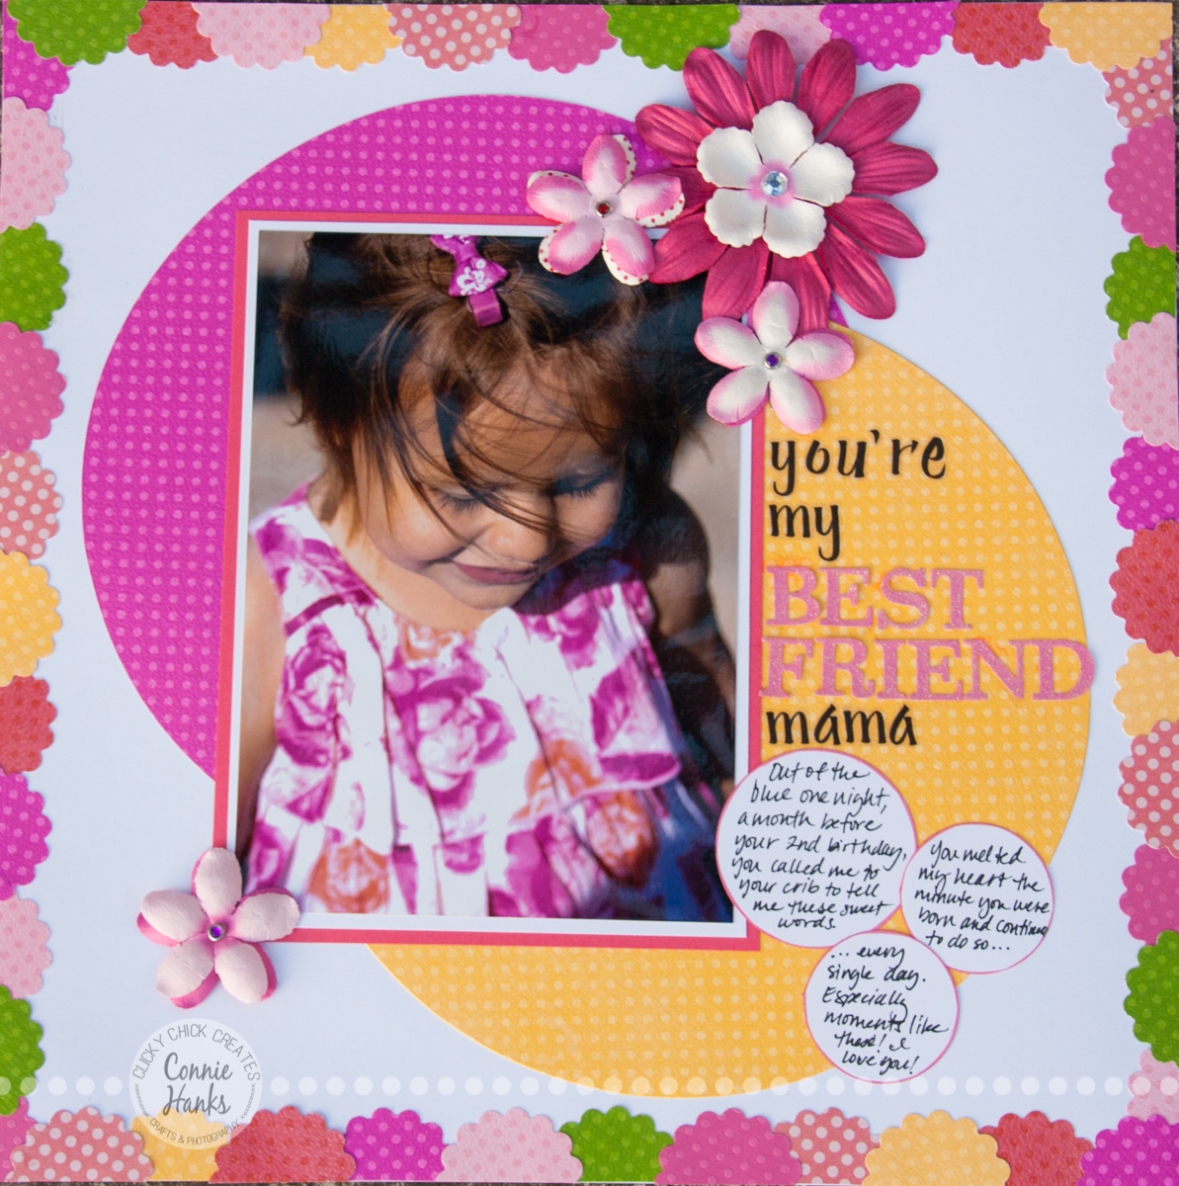 Connie Hanks Photography // ClickyChickCreates.com // An afternoon at the park, hearing the sweetest words from my sweet baby - "You're my best friend, mama" scrapbook layout